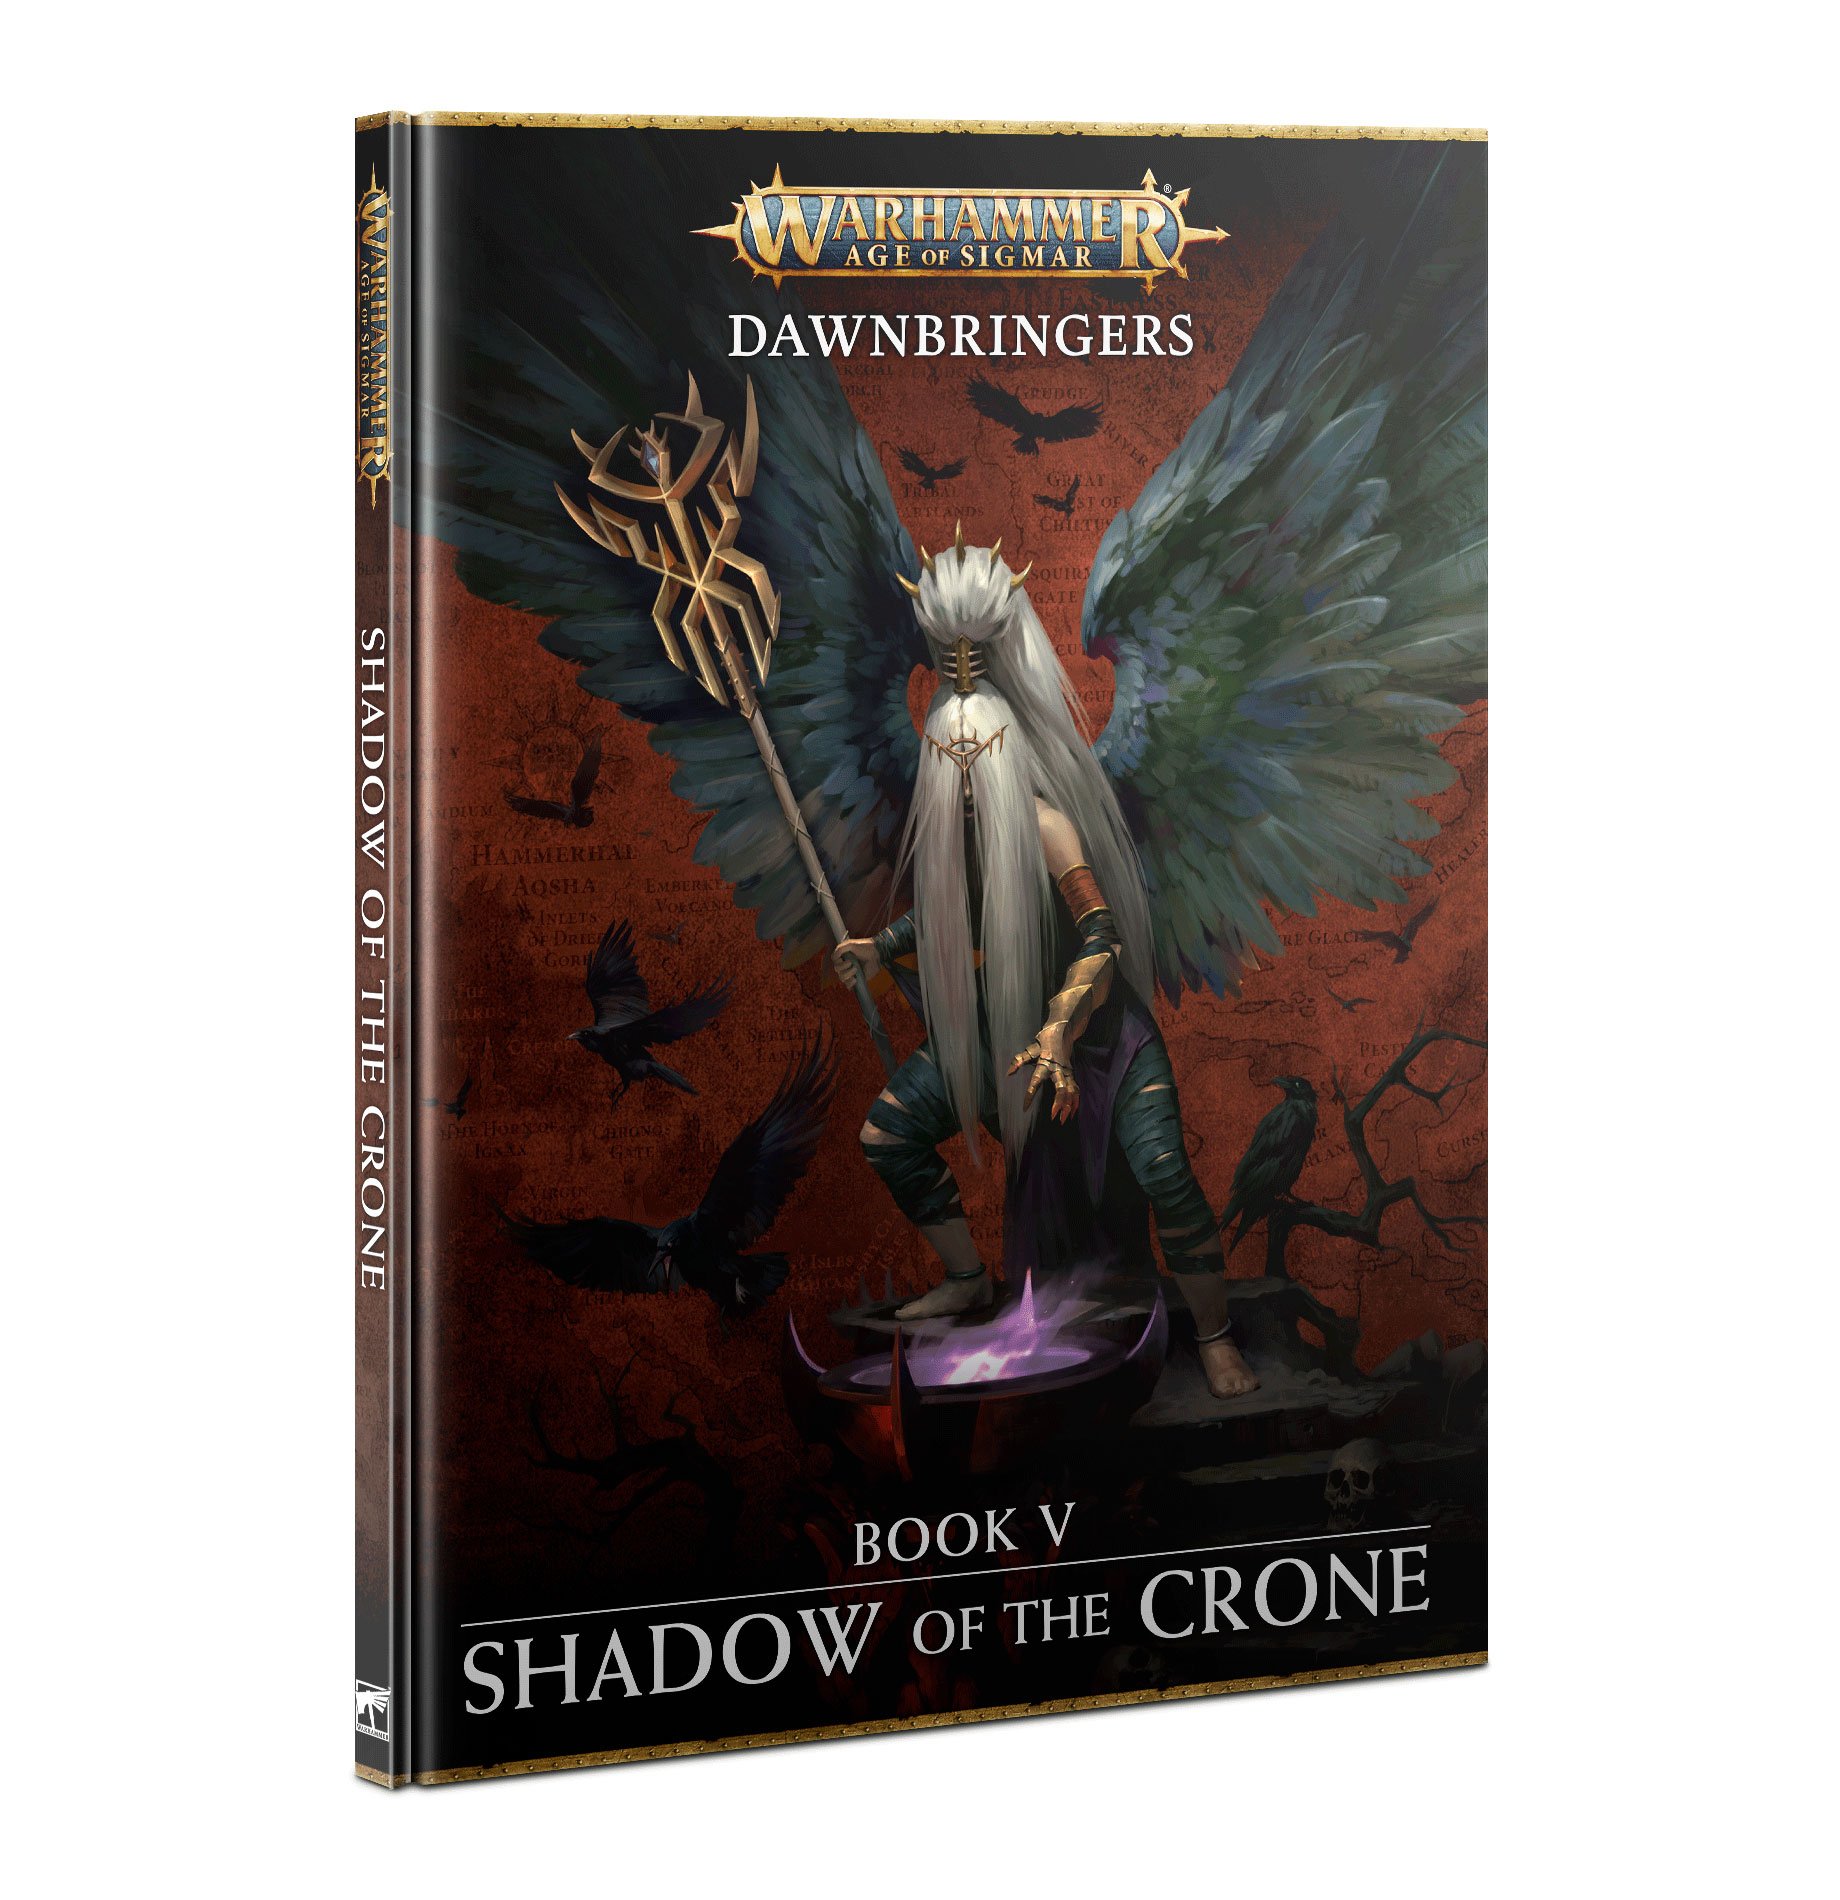 shadows of the crone cover